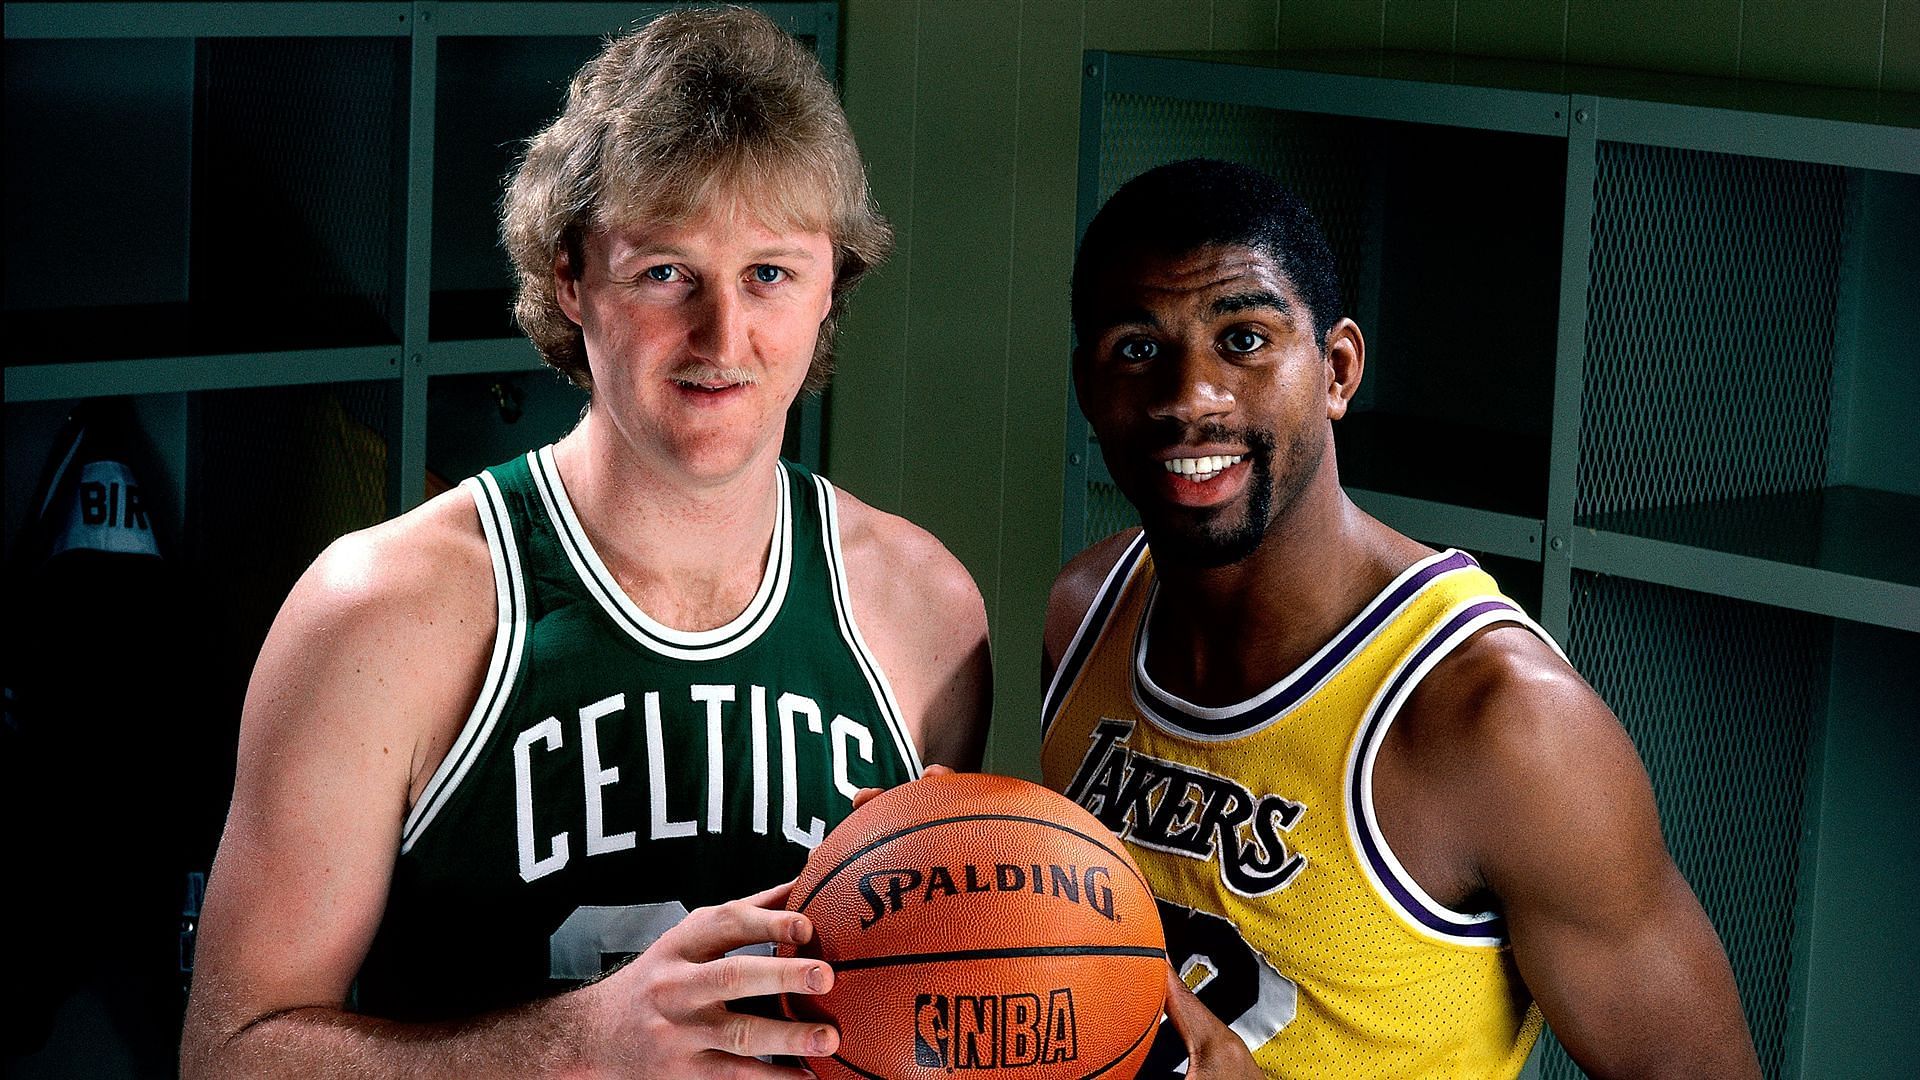 When they came to the NBA stuff started to happen, and then Michael came in  and took it to a whole other level” - Charles Barkley thanks Magic Johnson  and Larry Bird